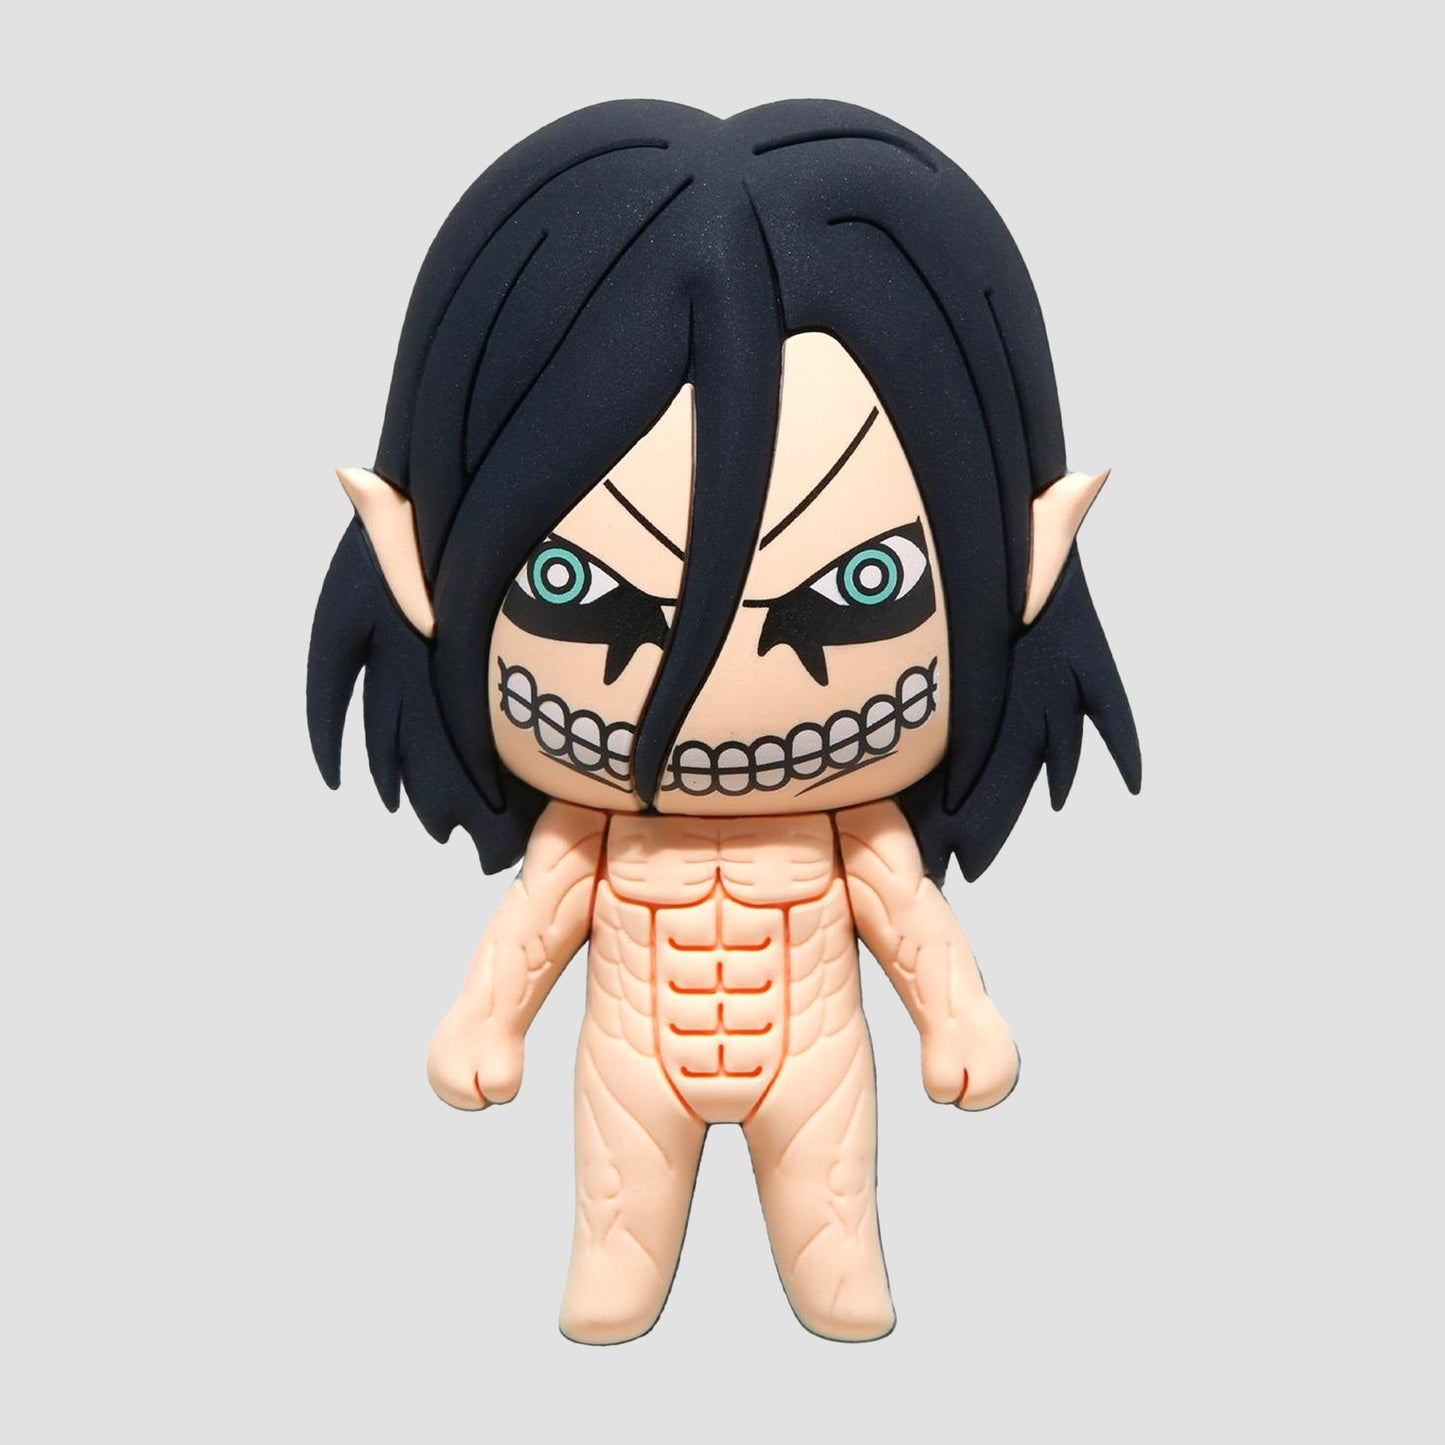 Load image into Gallery viewer, Eren Yeager Attack Titan (Attack on Titan) 3D Foam Magnet
